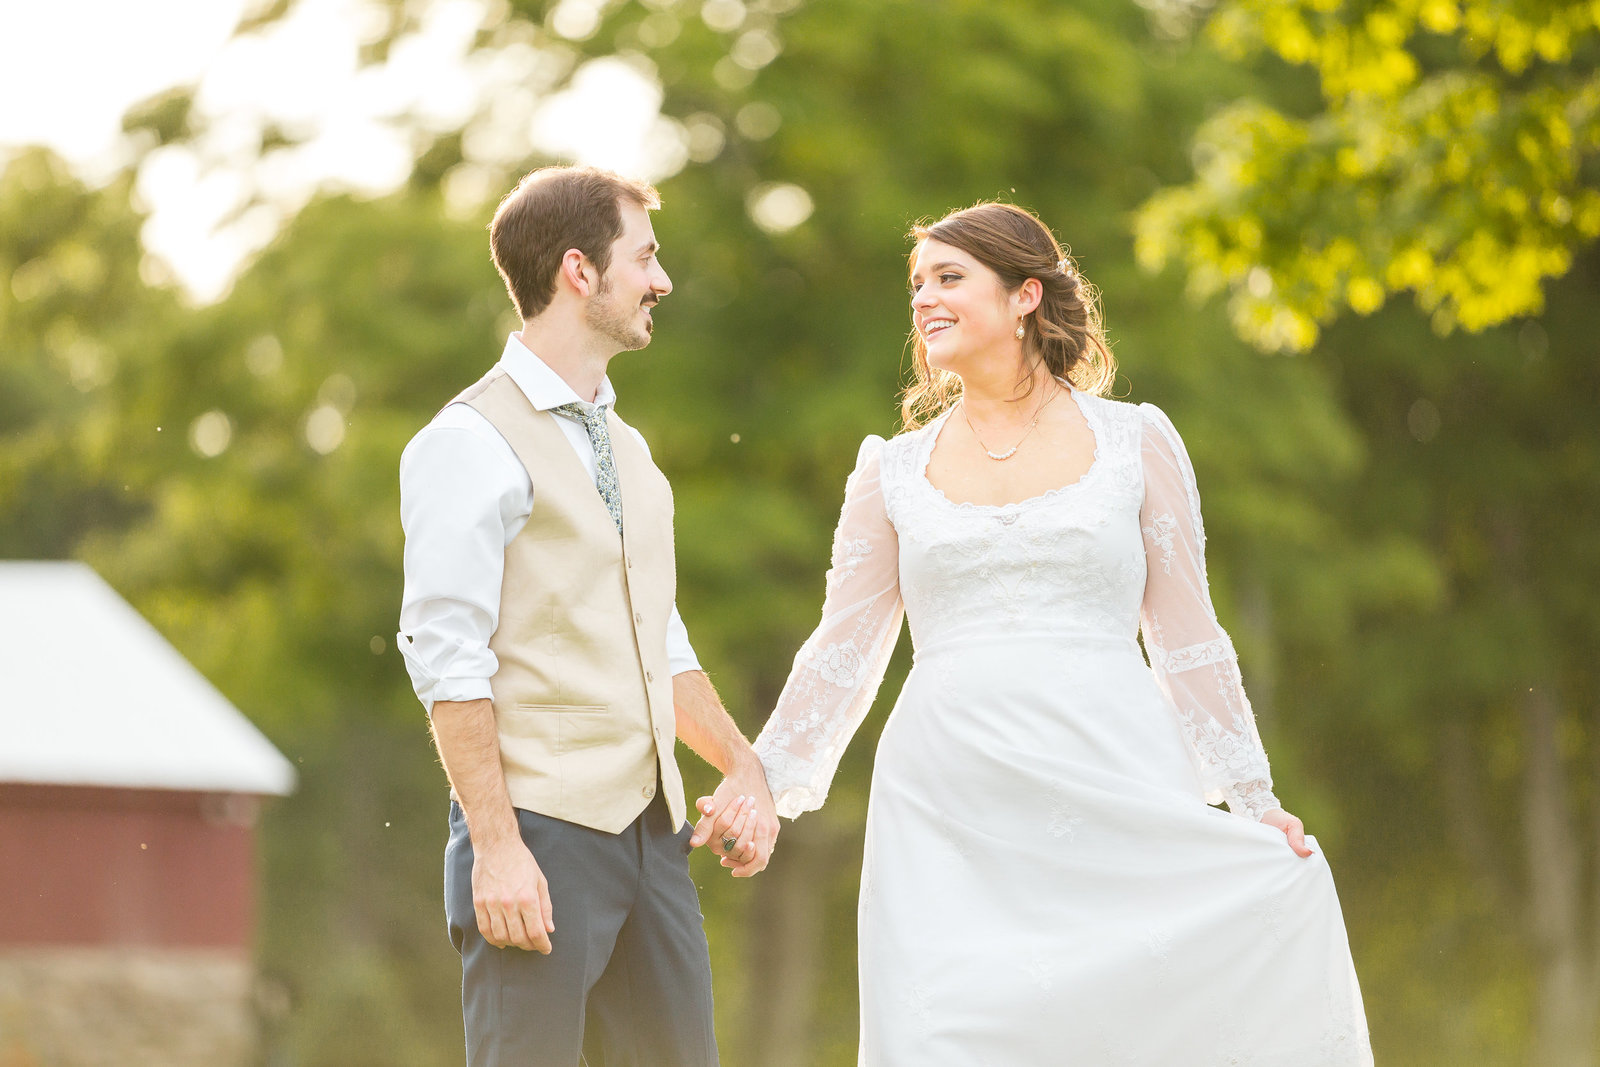 Bride and groom at Parmelee Farm Wedding in Connecticut by Jamerlyn Brown Photography